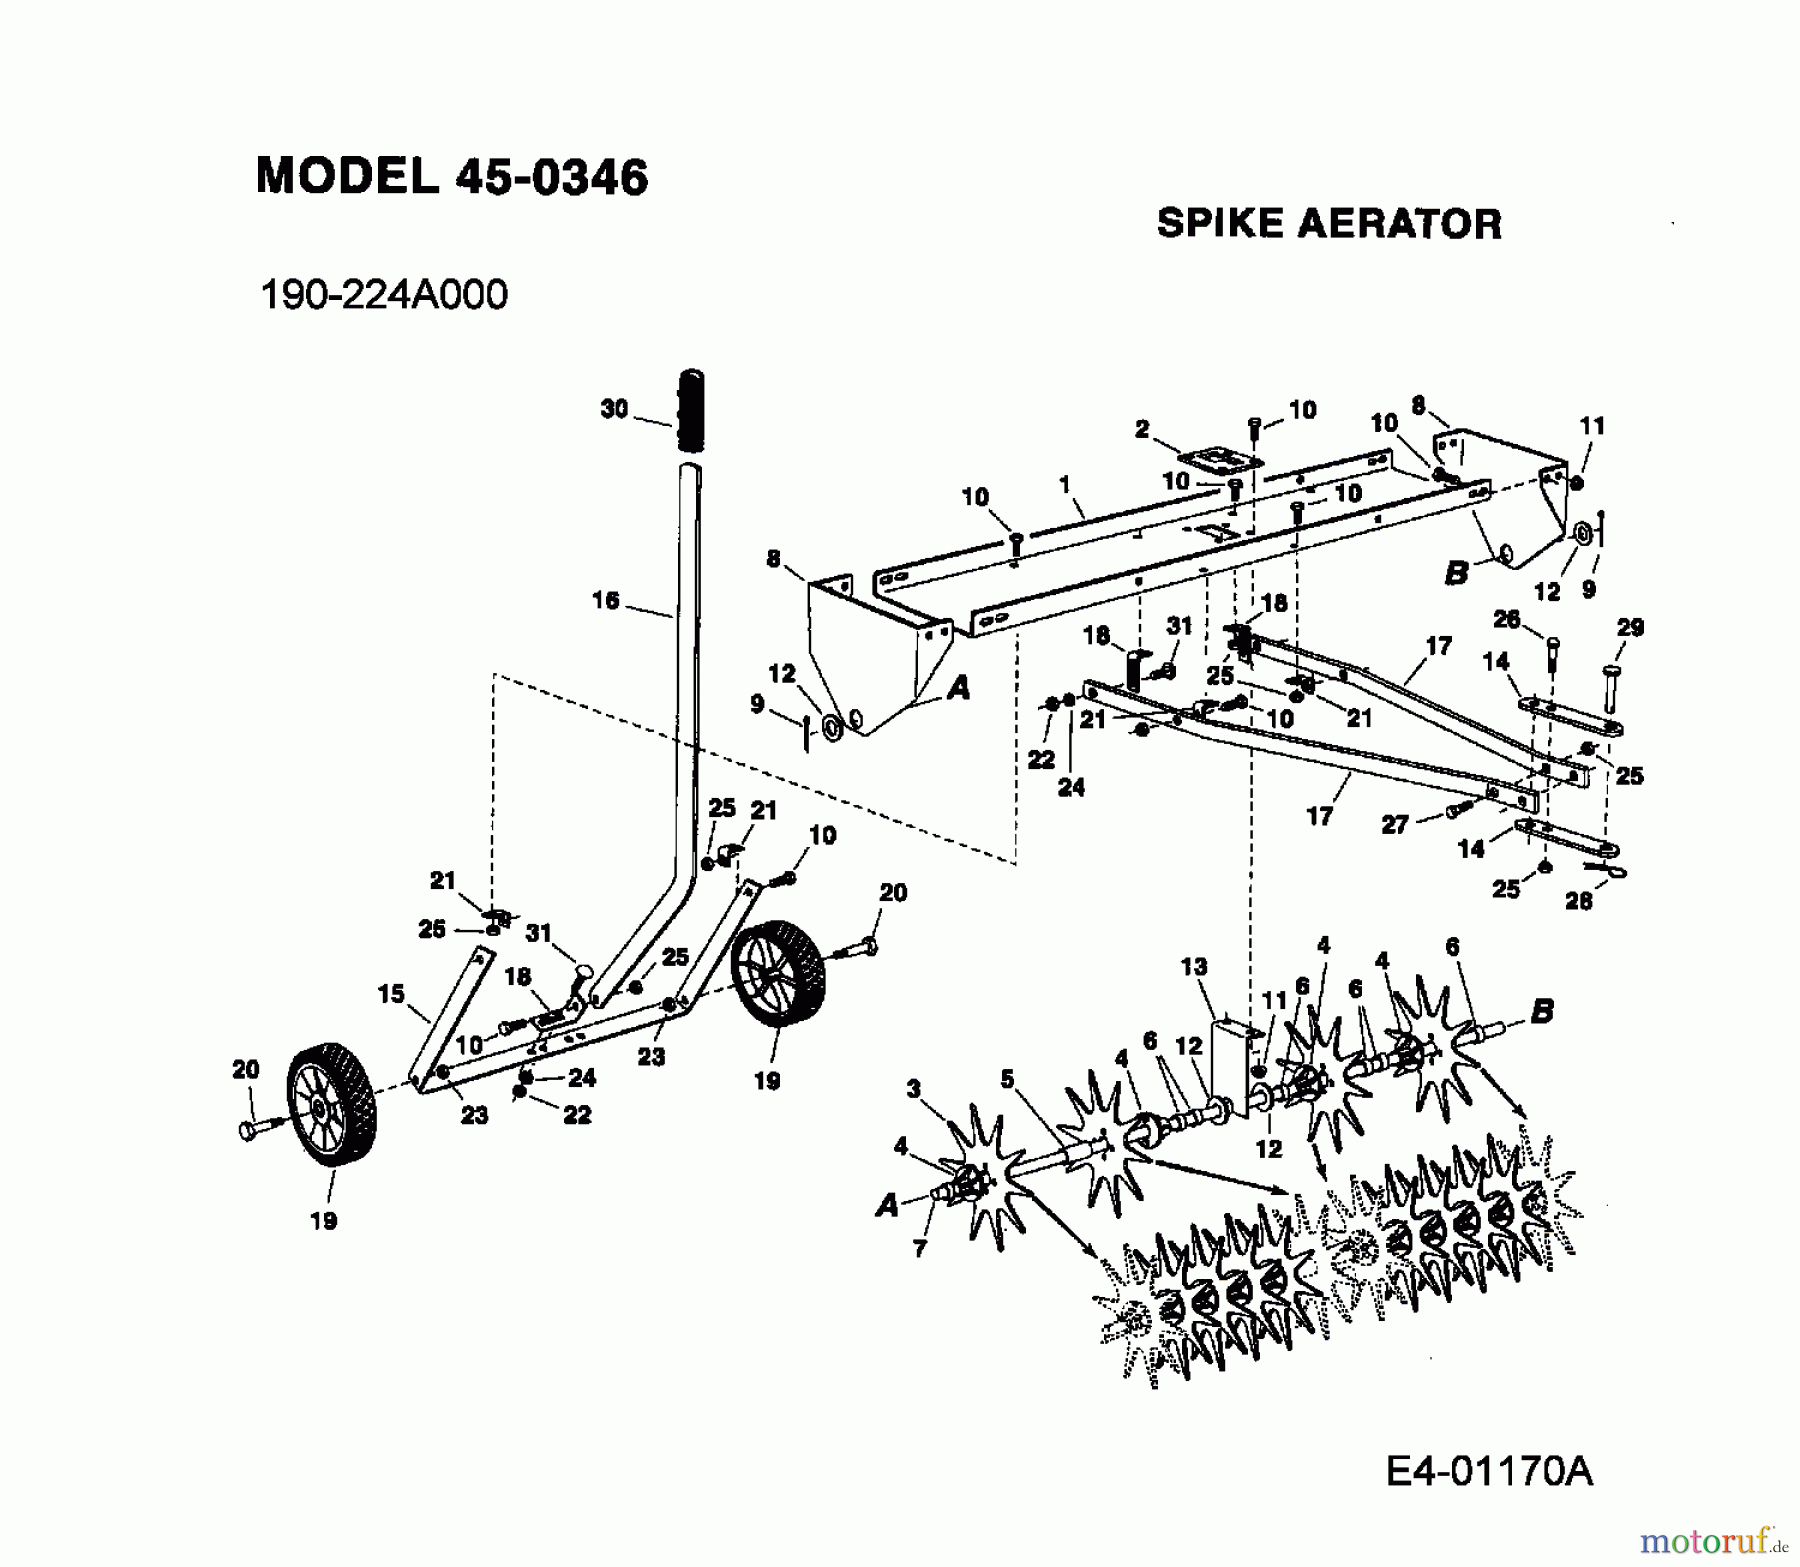  MTD Accessories Accessories garden and lawn tractors Groomer 45-0346  (190-224A000) 190-224A000  (2013) Basic machine